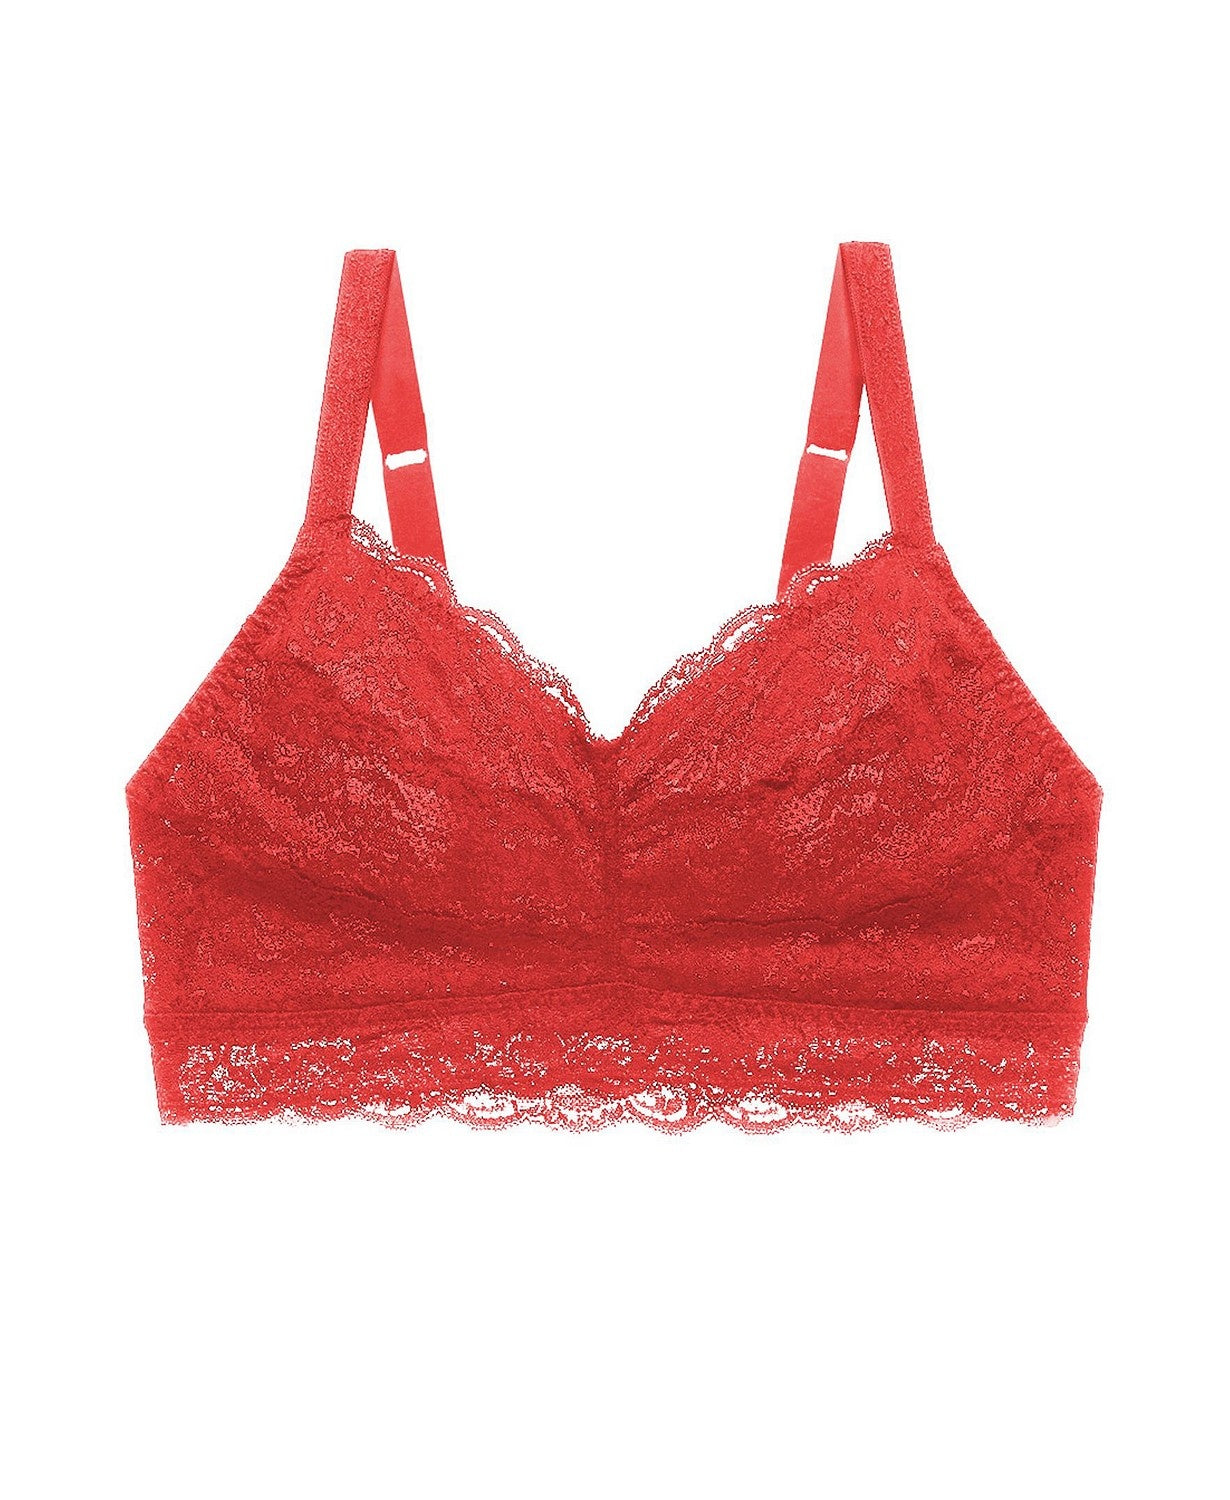 Cosabella Never Say Never Extended Sweetie Bralette – Top Drawer